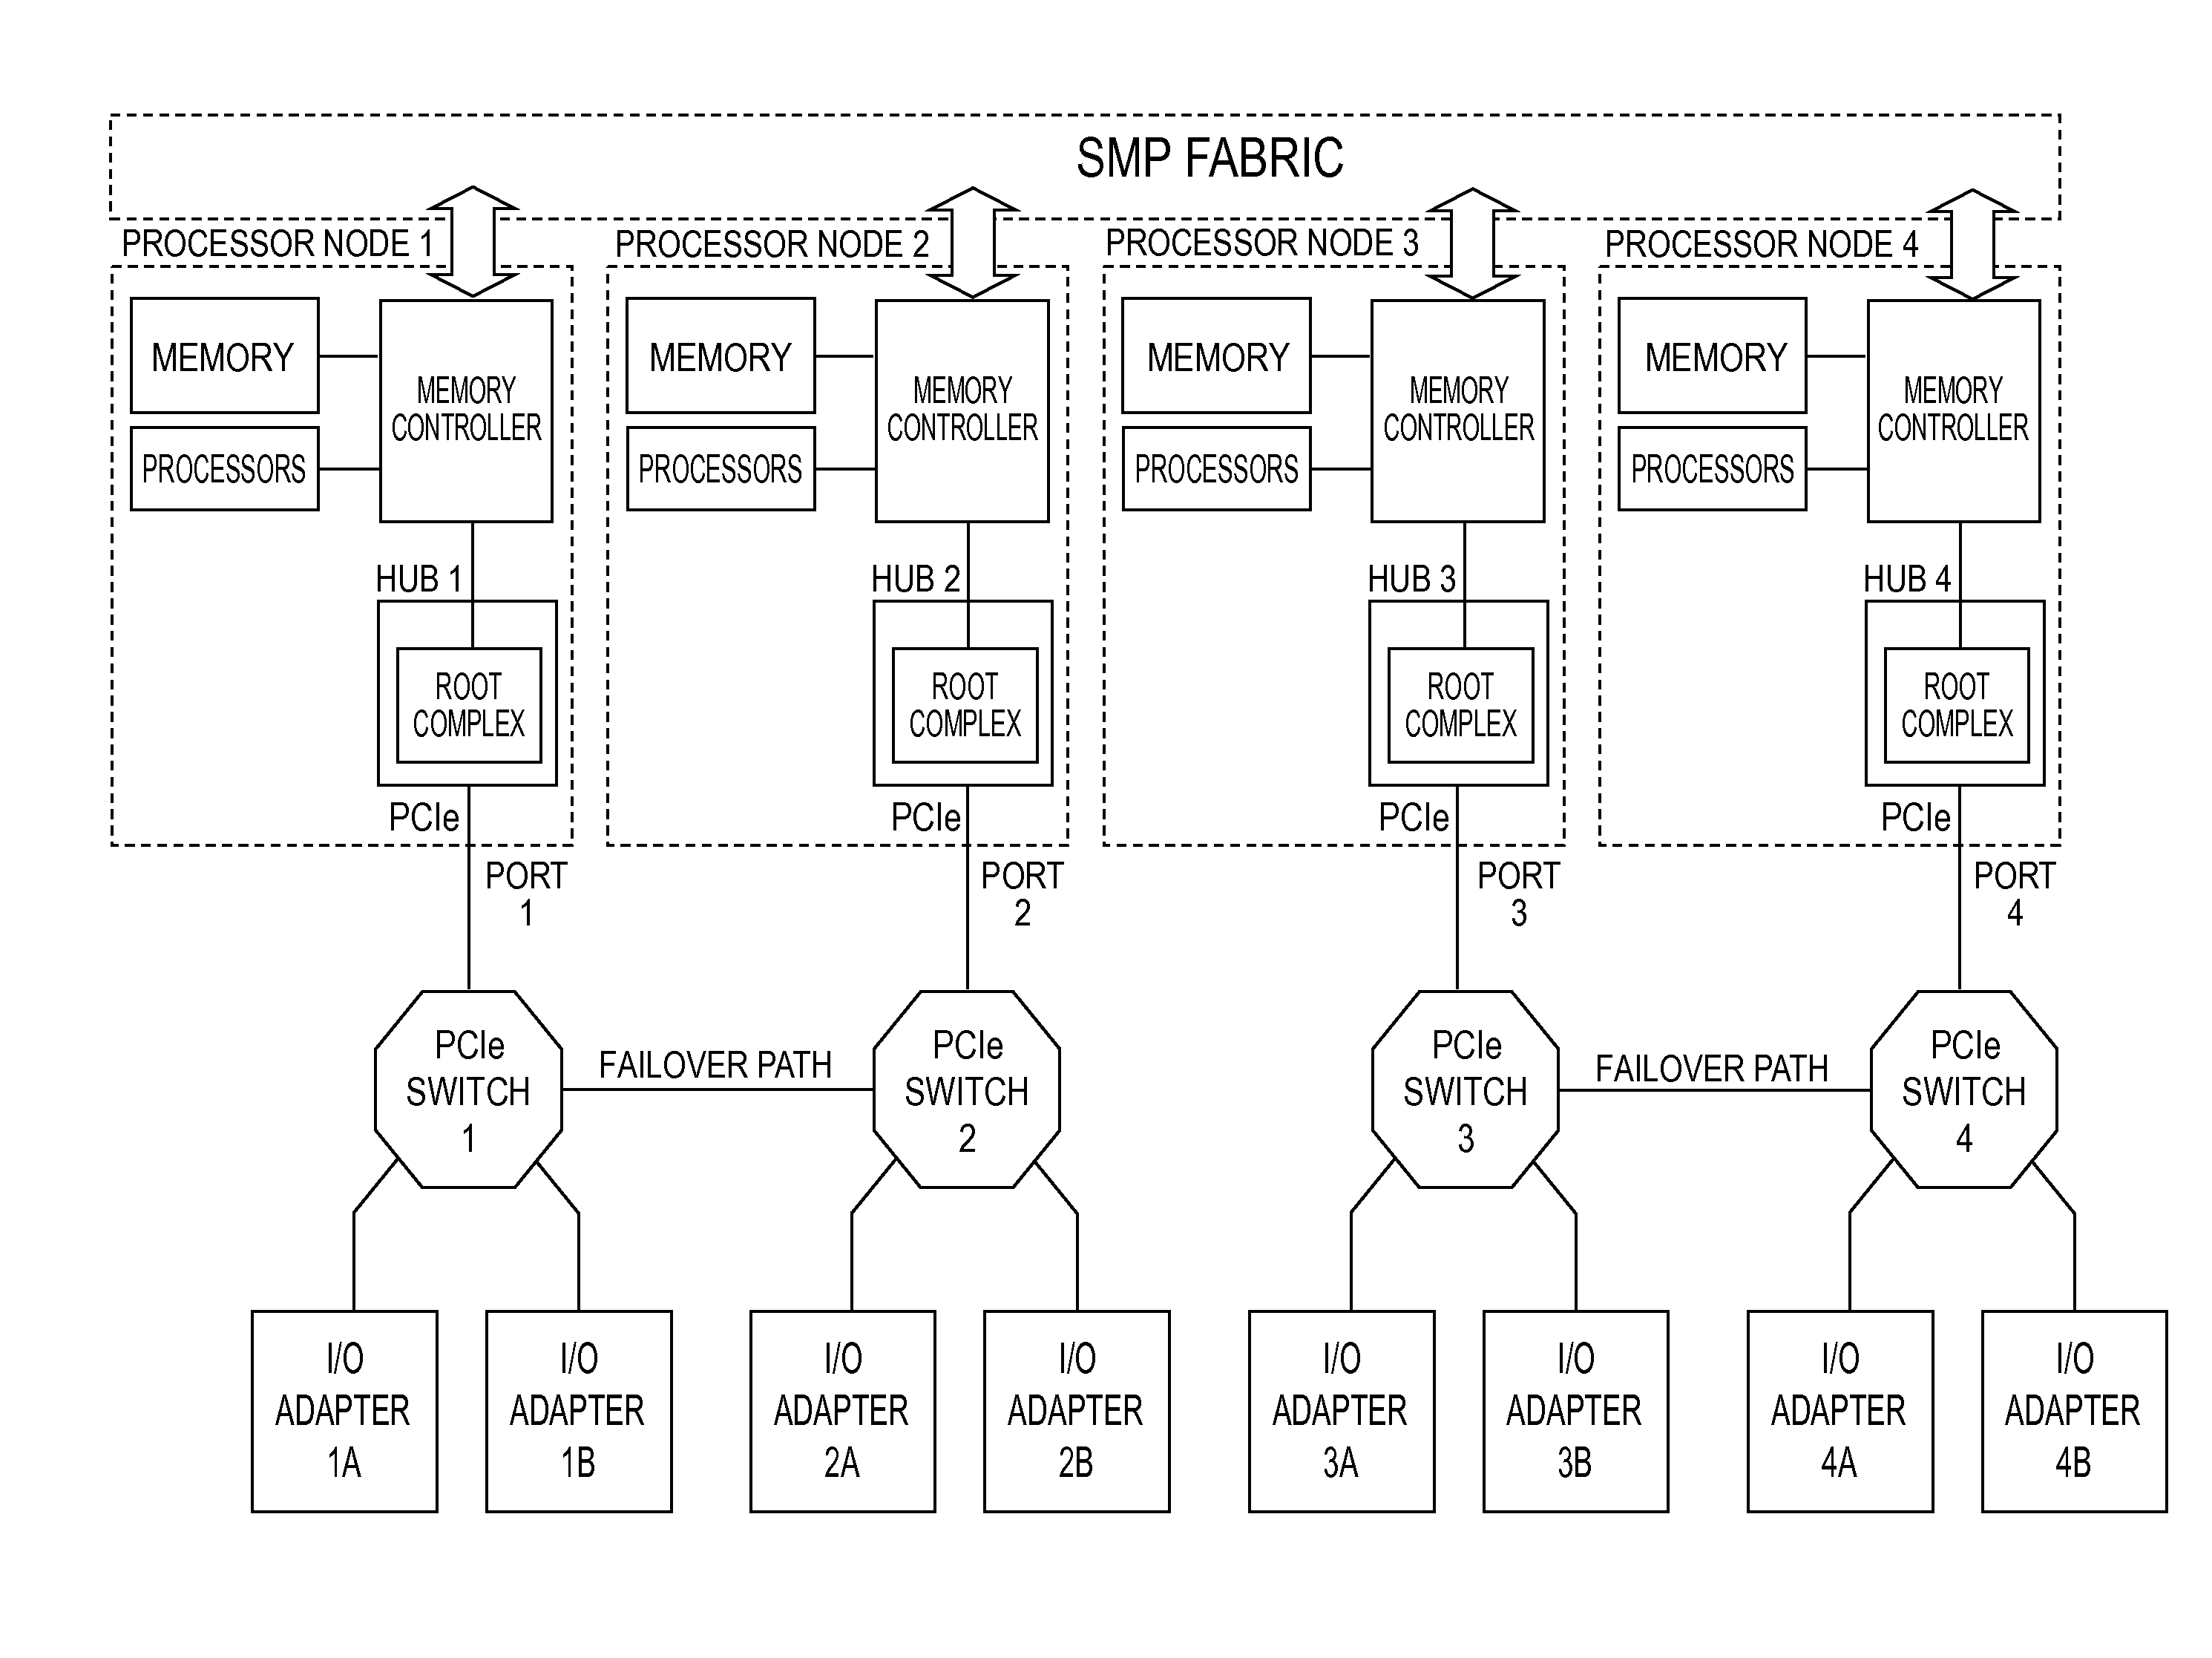 Switch failover control in a multiprocessor computer system